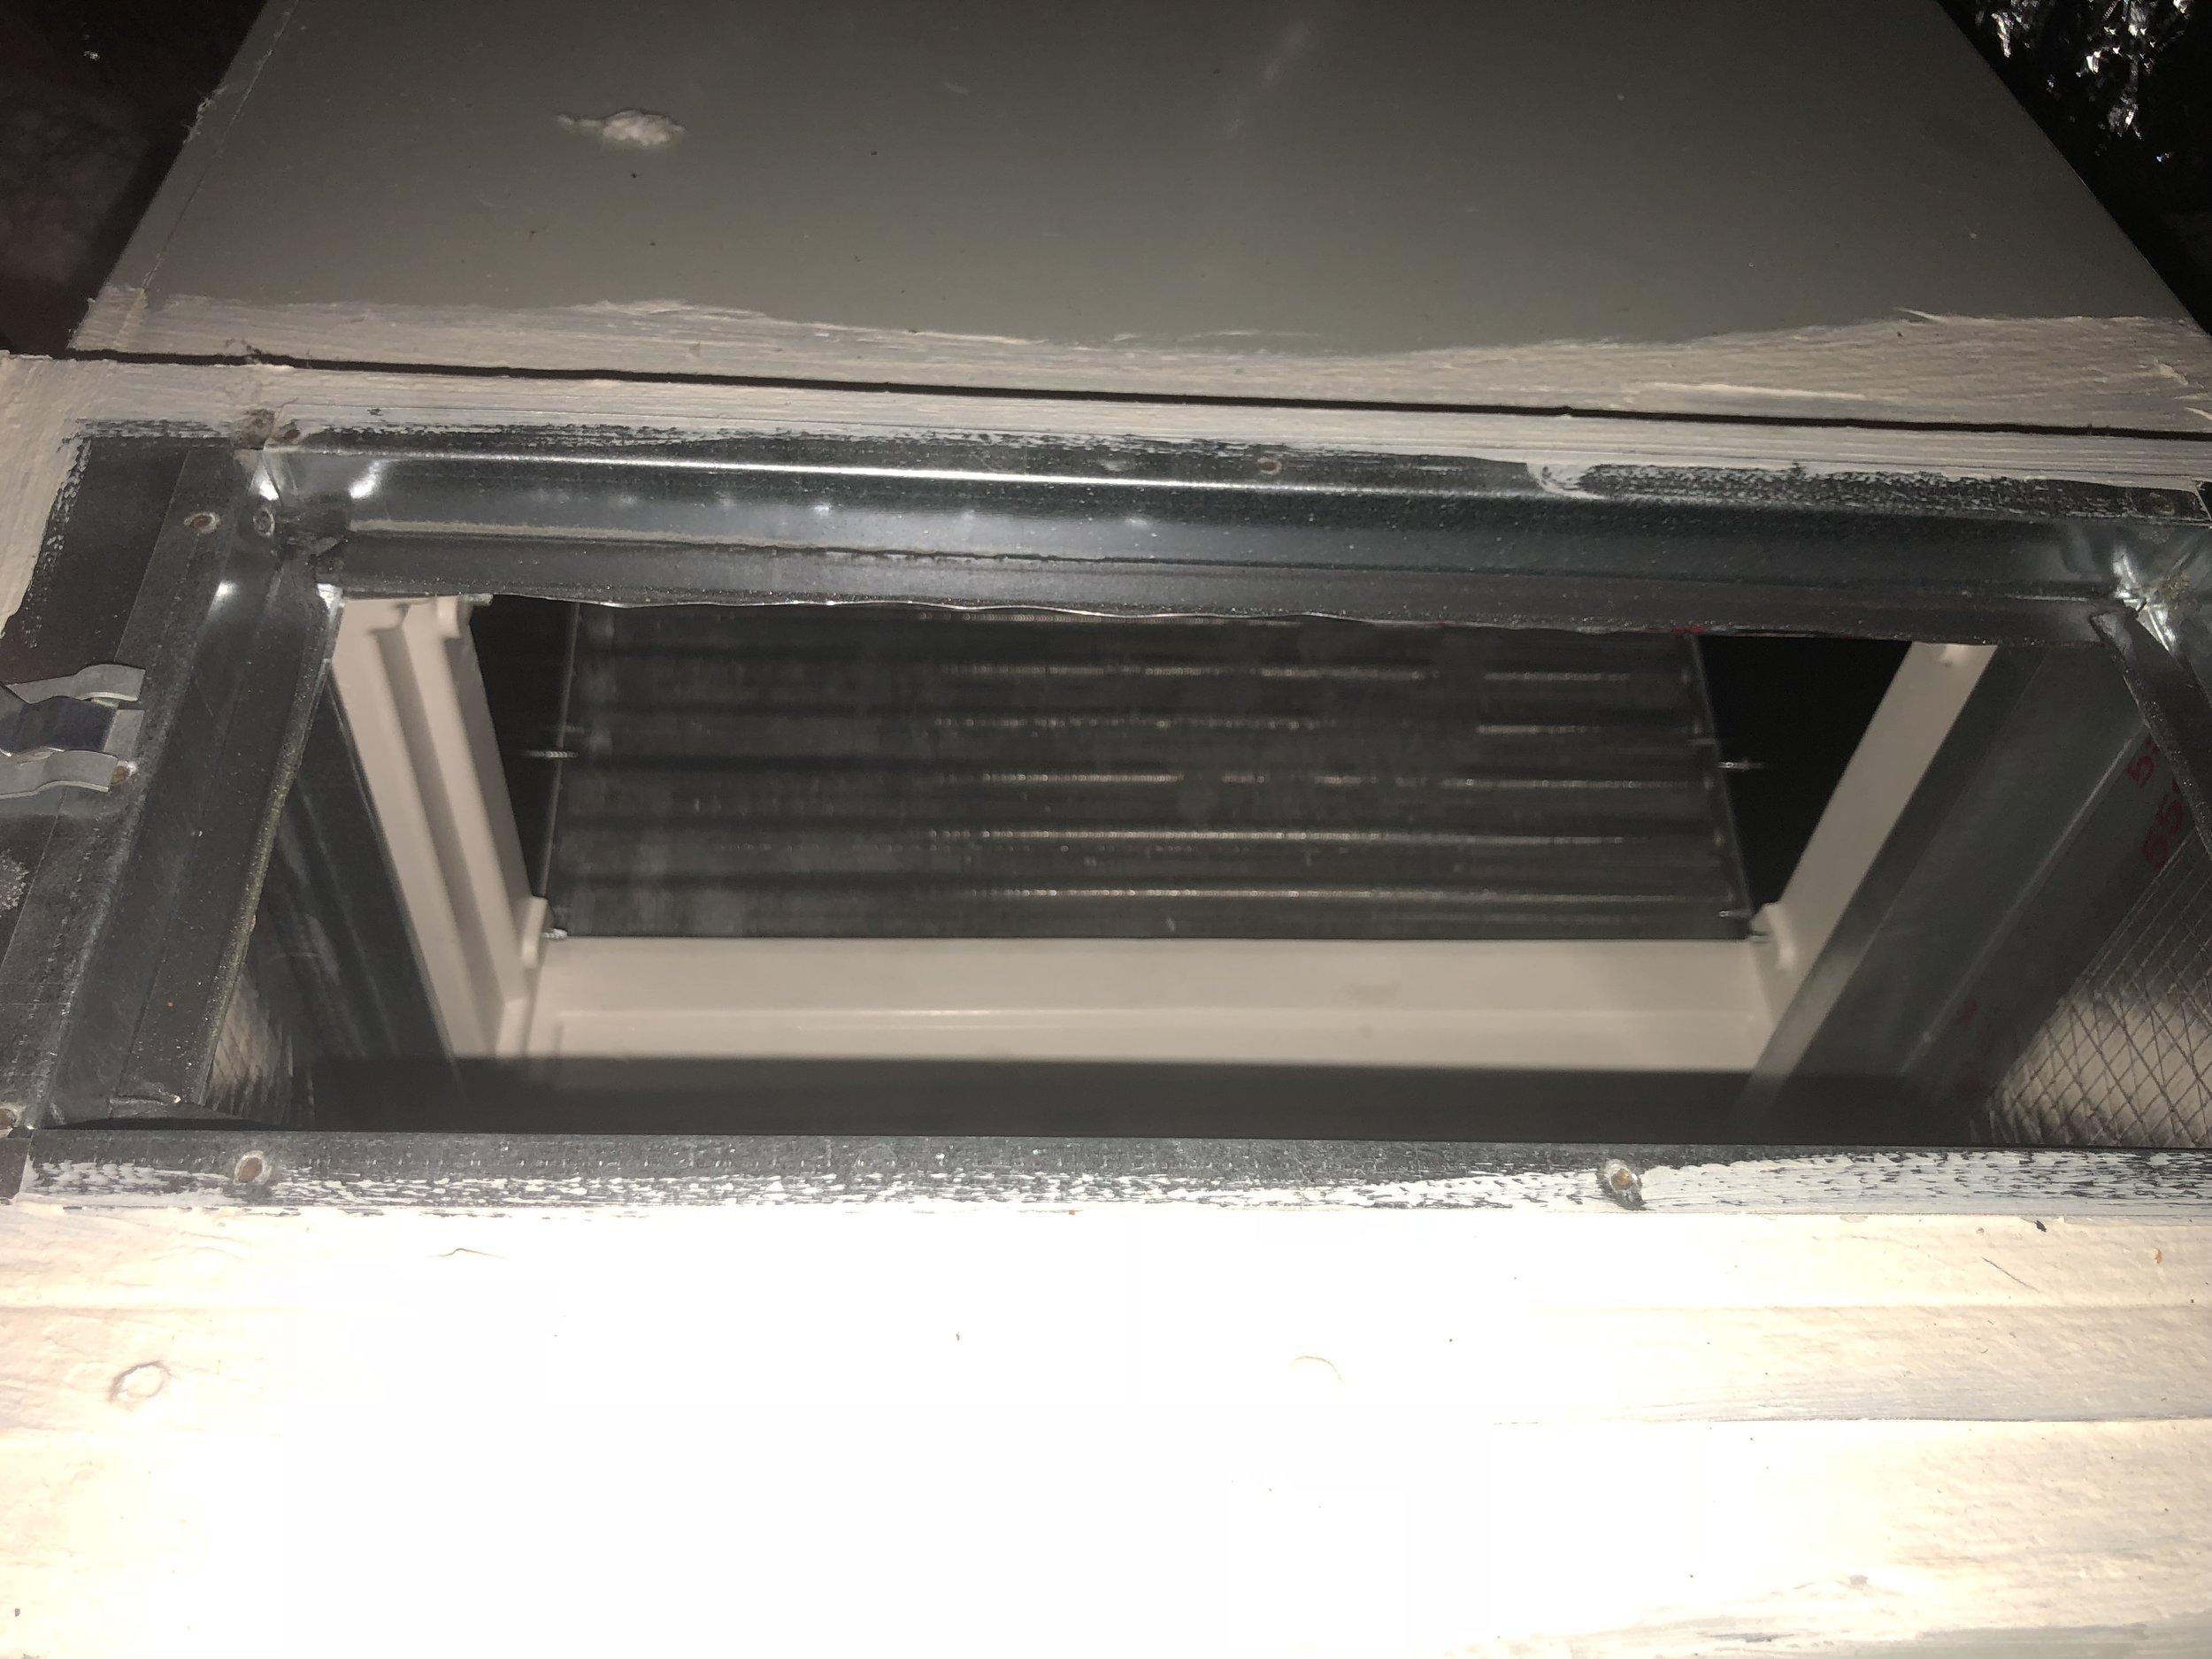 Installing an System Service Transition on new evaporator coil or furnace installs will allow you to clean your coils without damaging the air sealant. #revairtx #revolutionair #hvacinstallations 